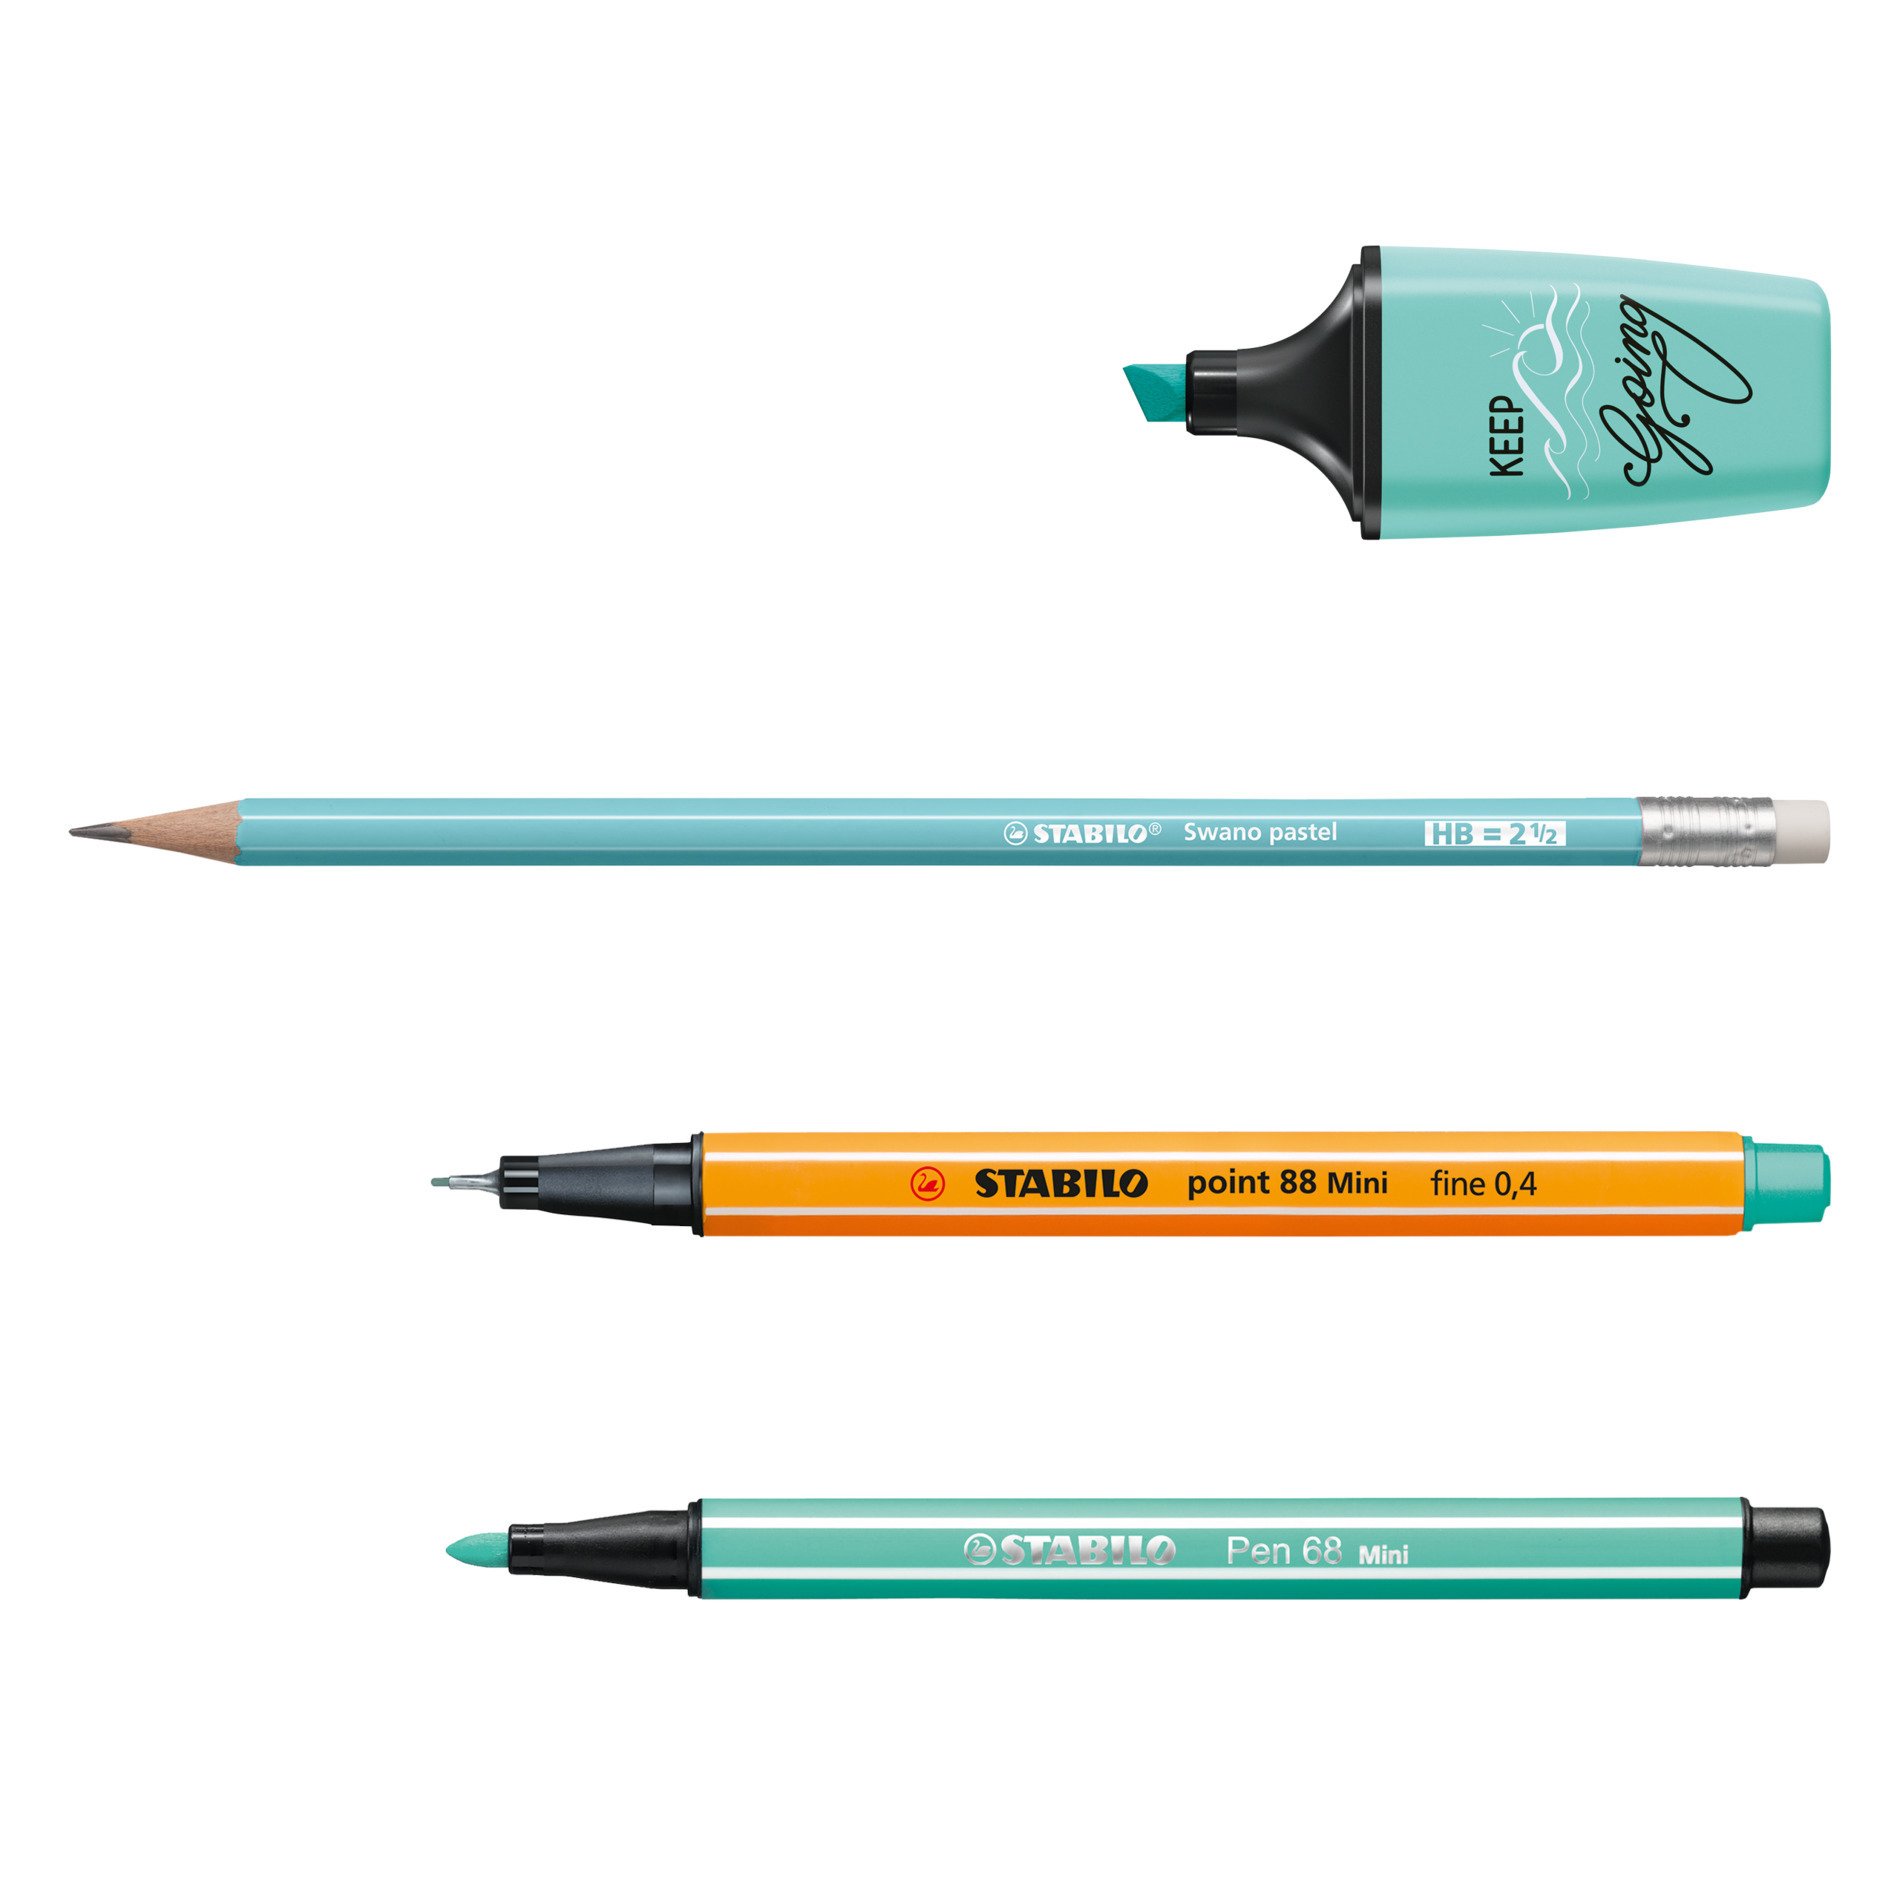 STABILO Swano Graphite Pastel HB Pencils, 6 Pack, Assorted Colours